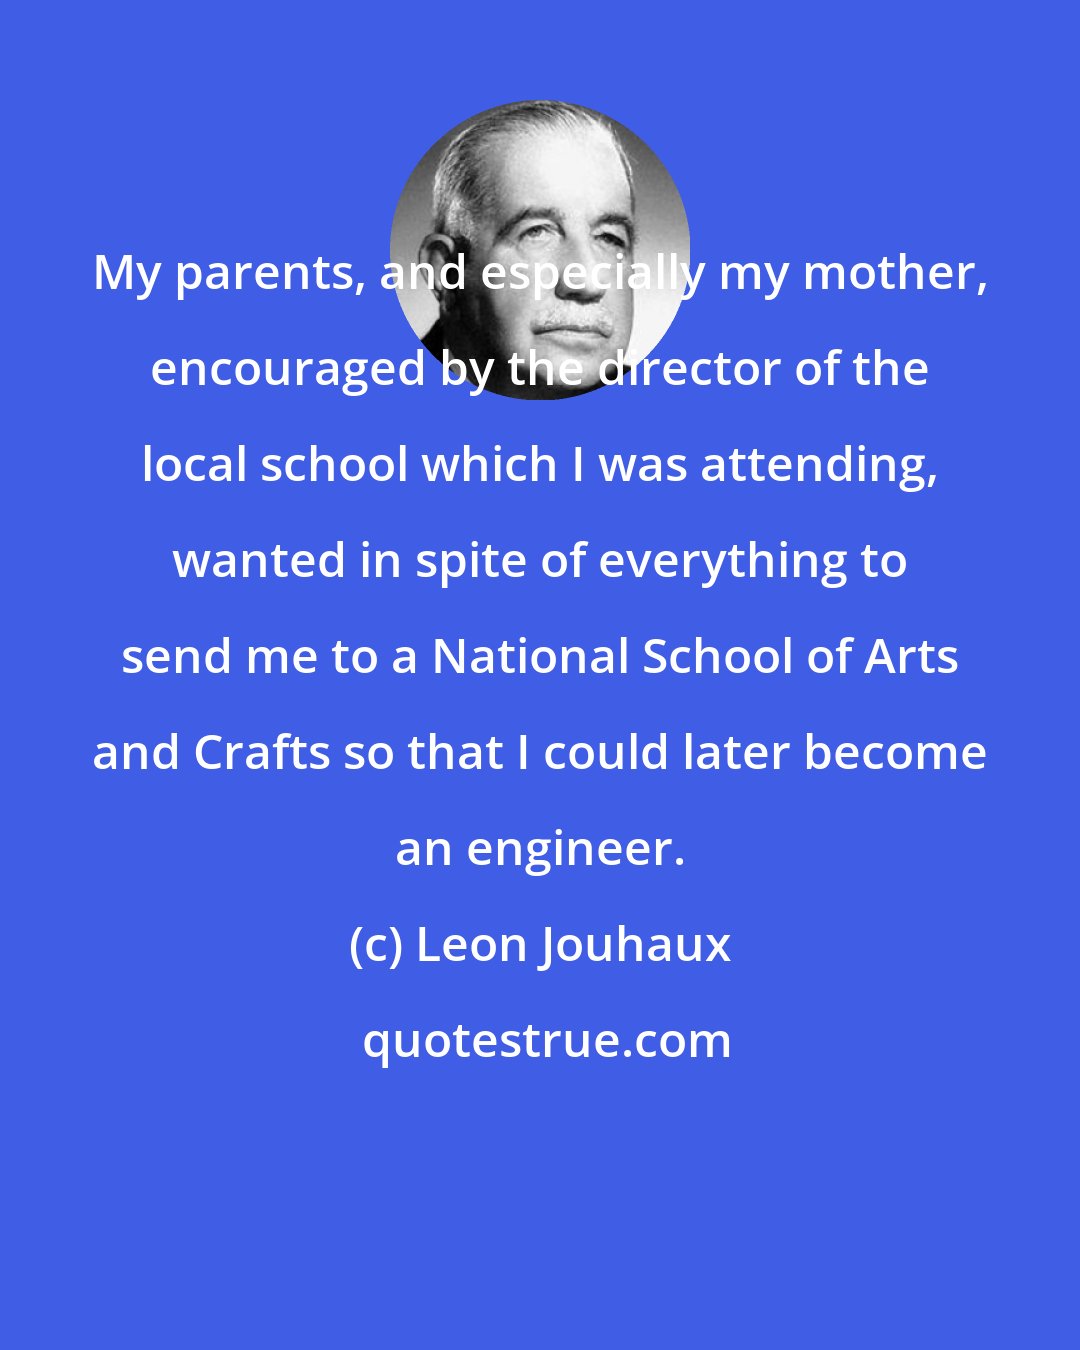 Leon Jouhaux: My parents, and especially my mother, encouraged by the director of the local school which I was attending, wanted in spite of everything to send me to a National School of Arts and Crafts so that I could later become an engineer.